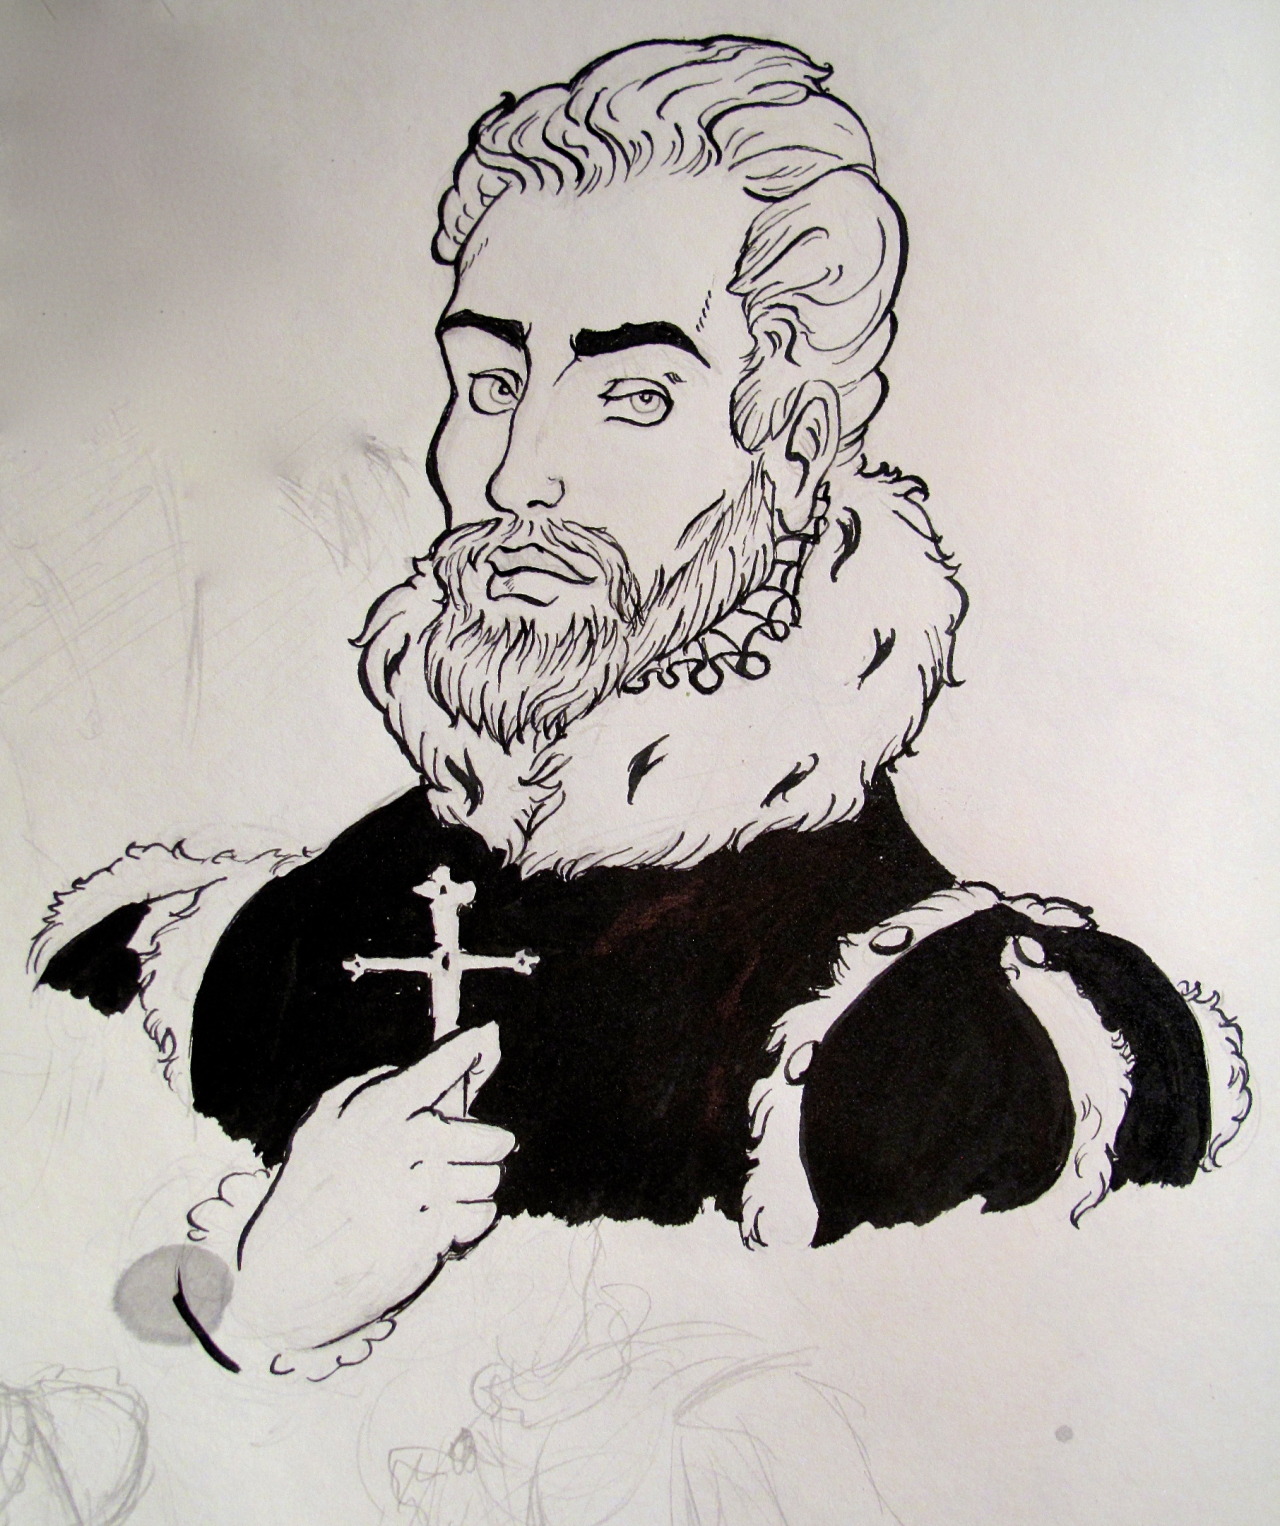 the-veebee:
“I have been SO inactive as of late and I apologize.
please enjoy this doodle of Philip II of Spain until I have more to post.
”